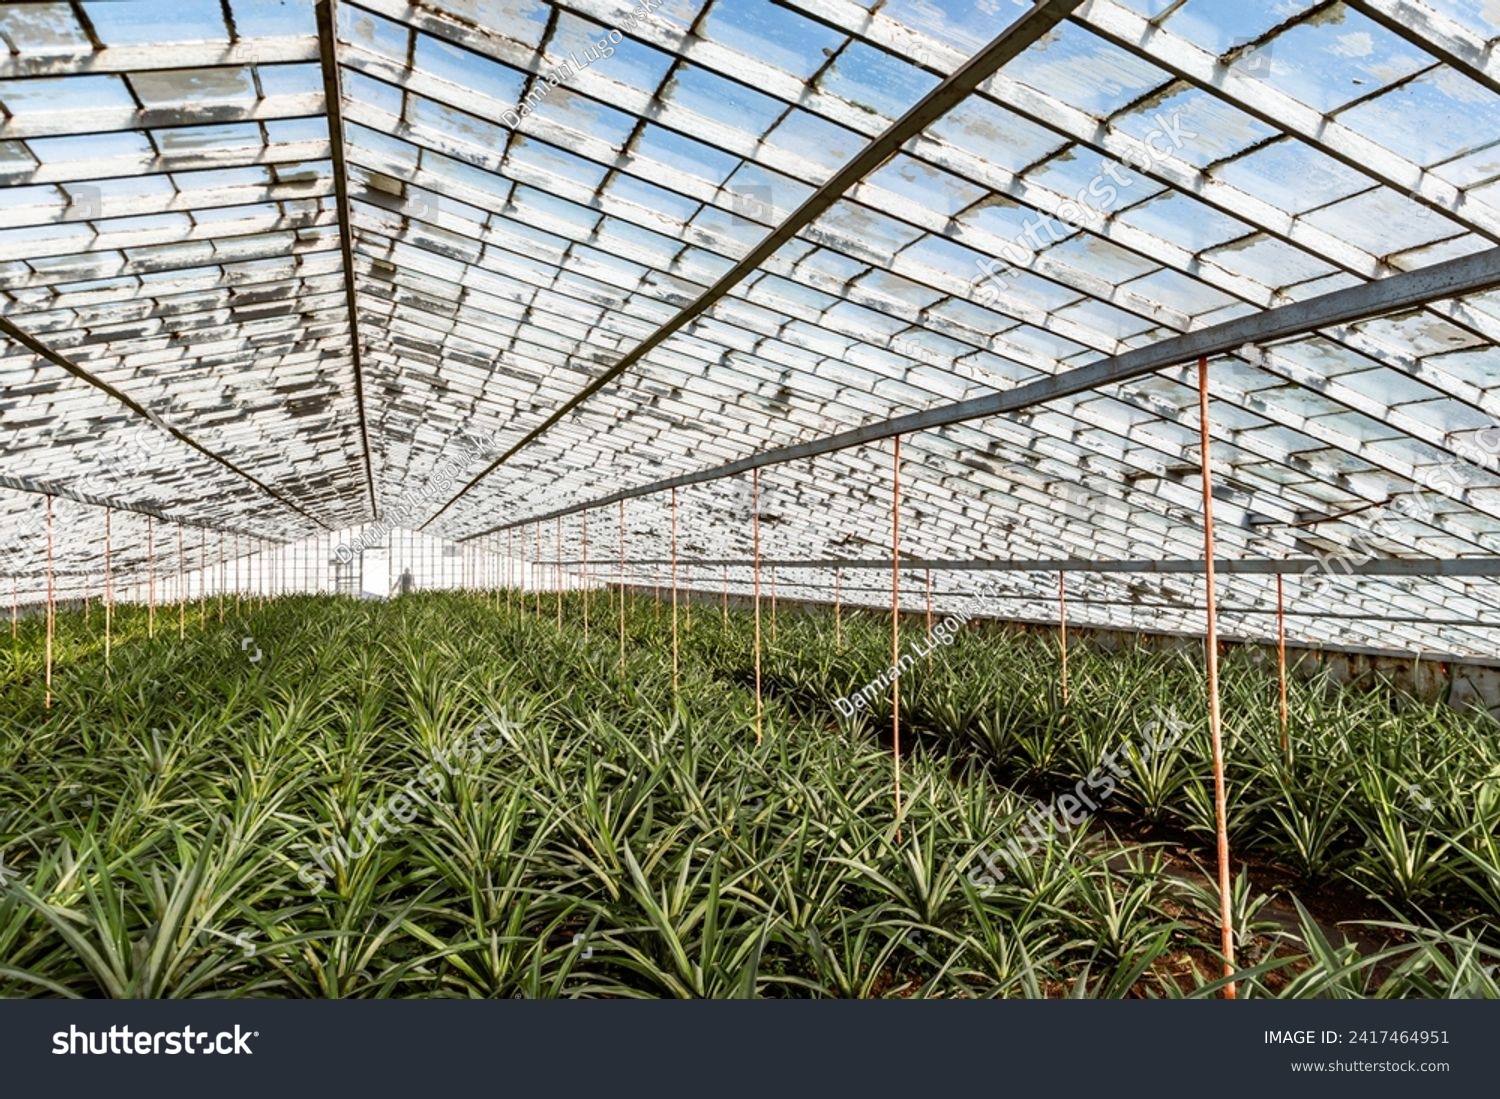 Inside glass greenhouse with rows of organic pineapples. Traditional pineapple plantation on Sao Miguel island, Azores, Portugal #2417464951